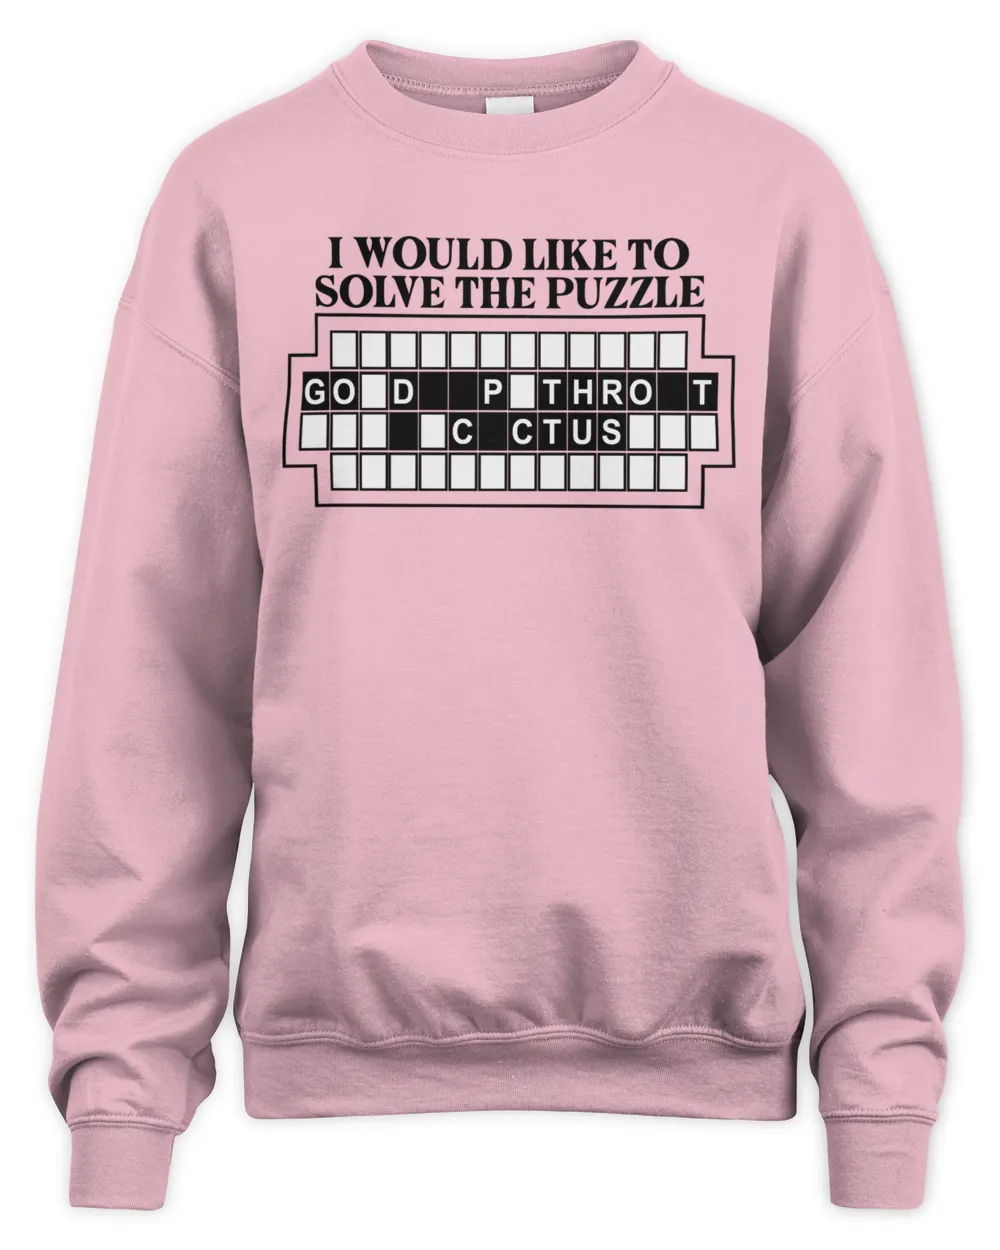 Would Like To Solve The Puzzle - Sweatshirt